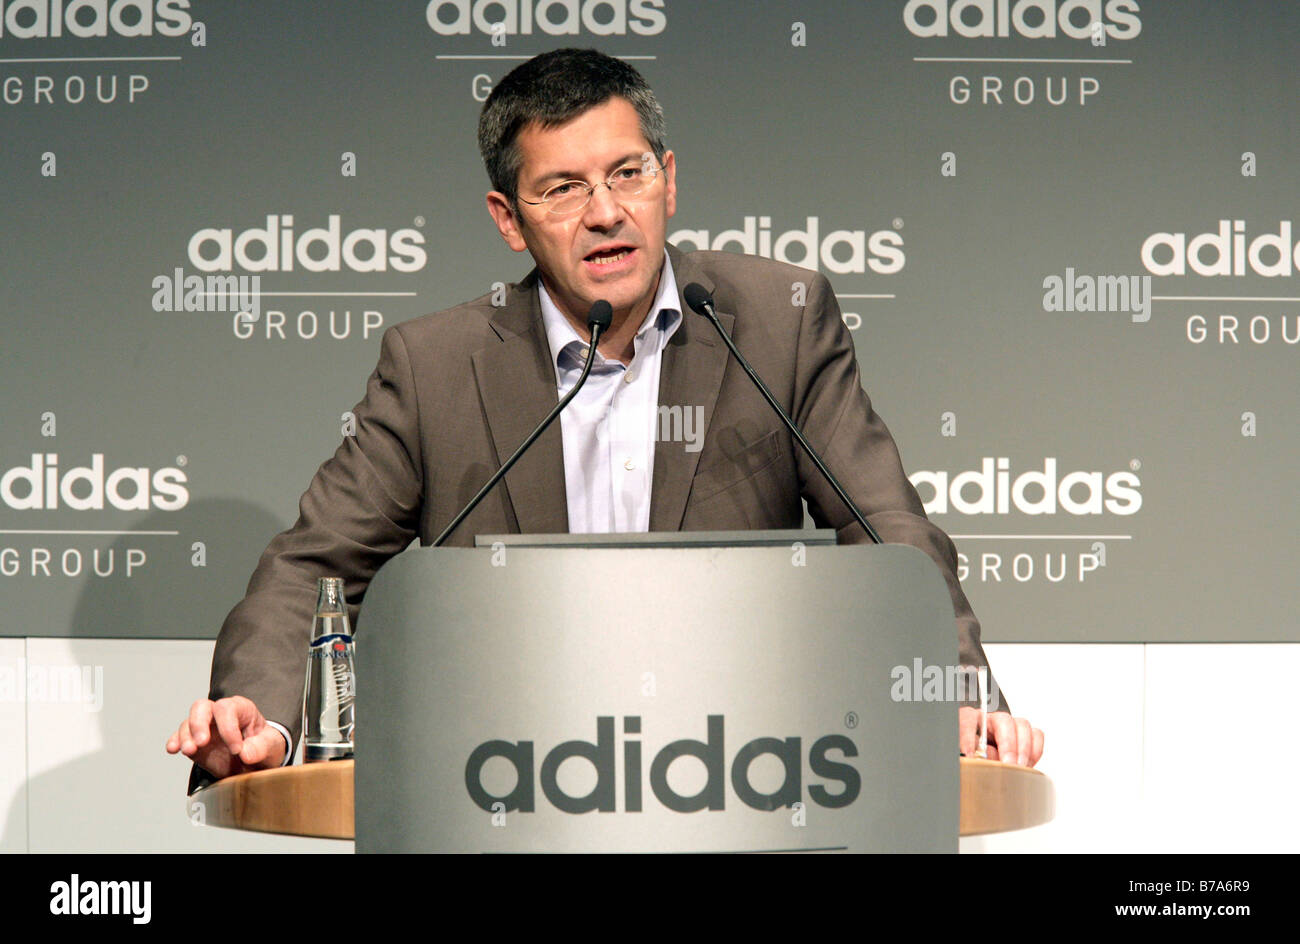 Herbert Hainer, chairman of the Adidas AG, at the press conference on  financial statements on the 05.03.2008 in Herzogenaurach Stock Photo - Alamy